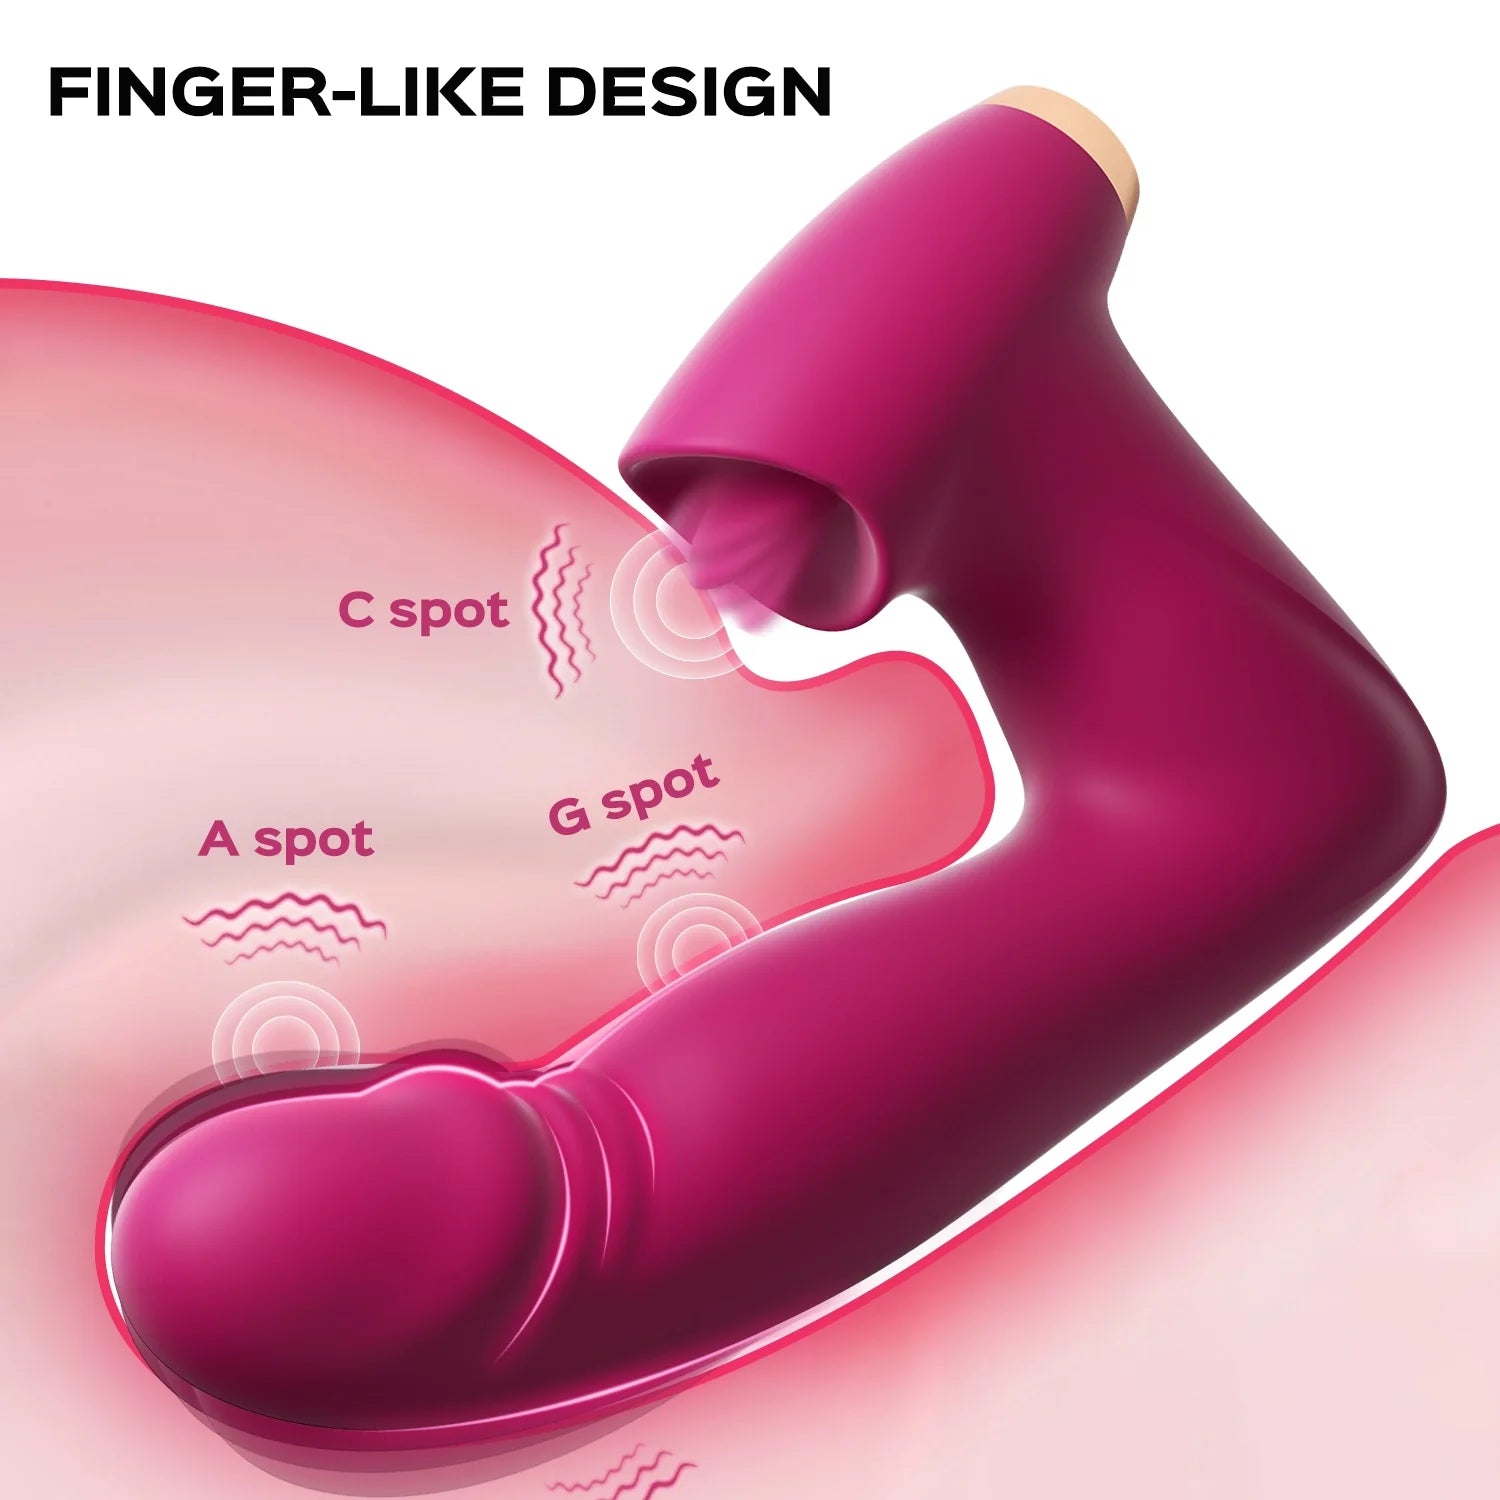 ROLA Clit Licking & Tapping G-spot Vibrator